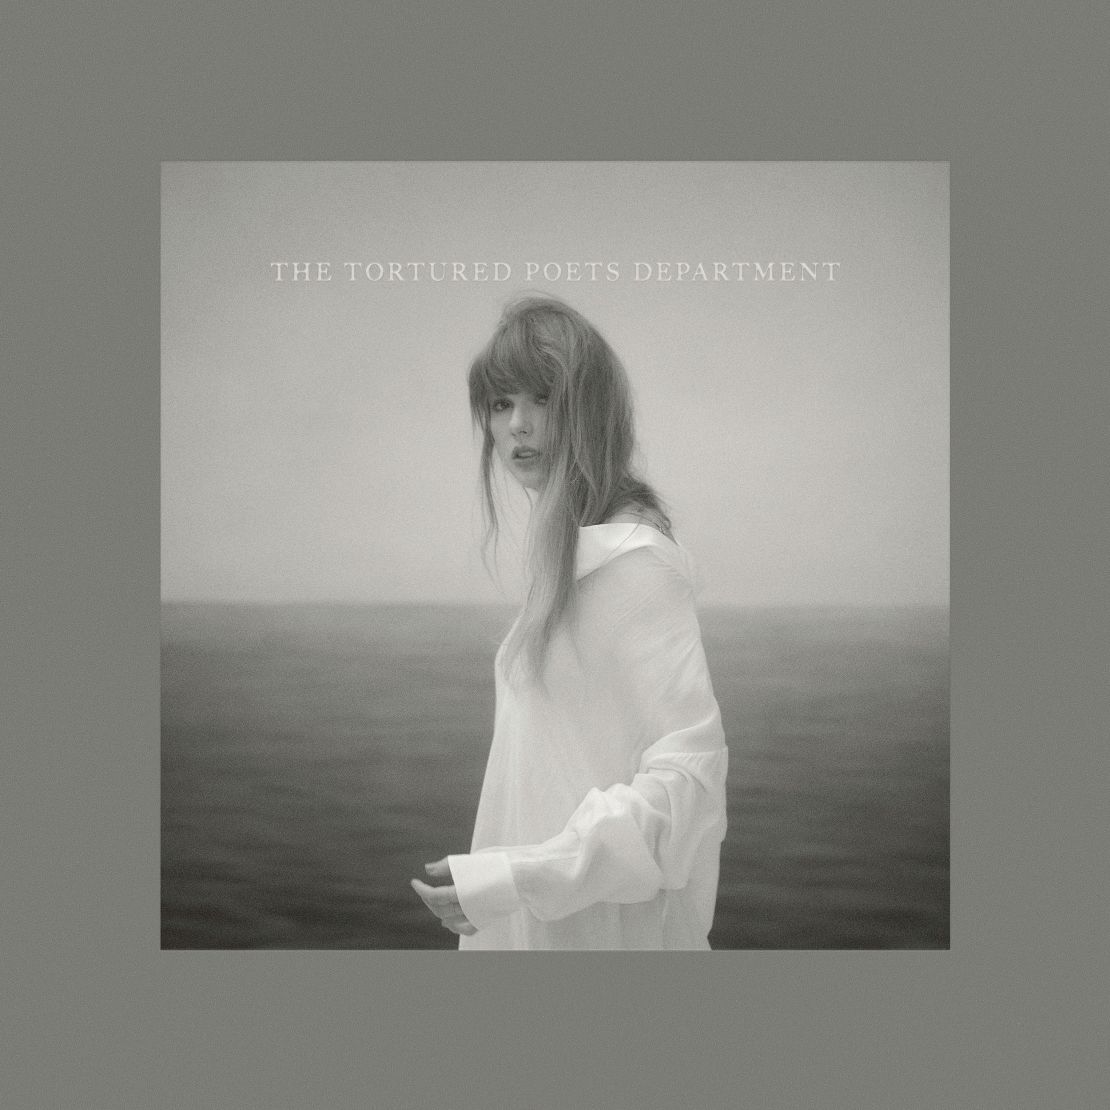 The cover of Taylor Swift's 'The Tortured Poets Department' double album released Friday.